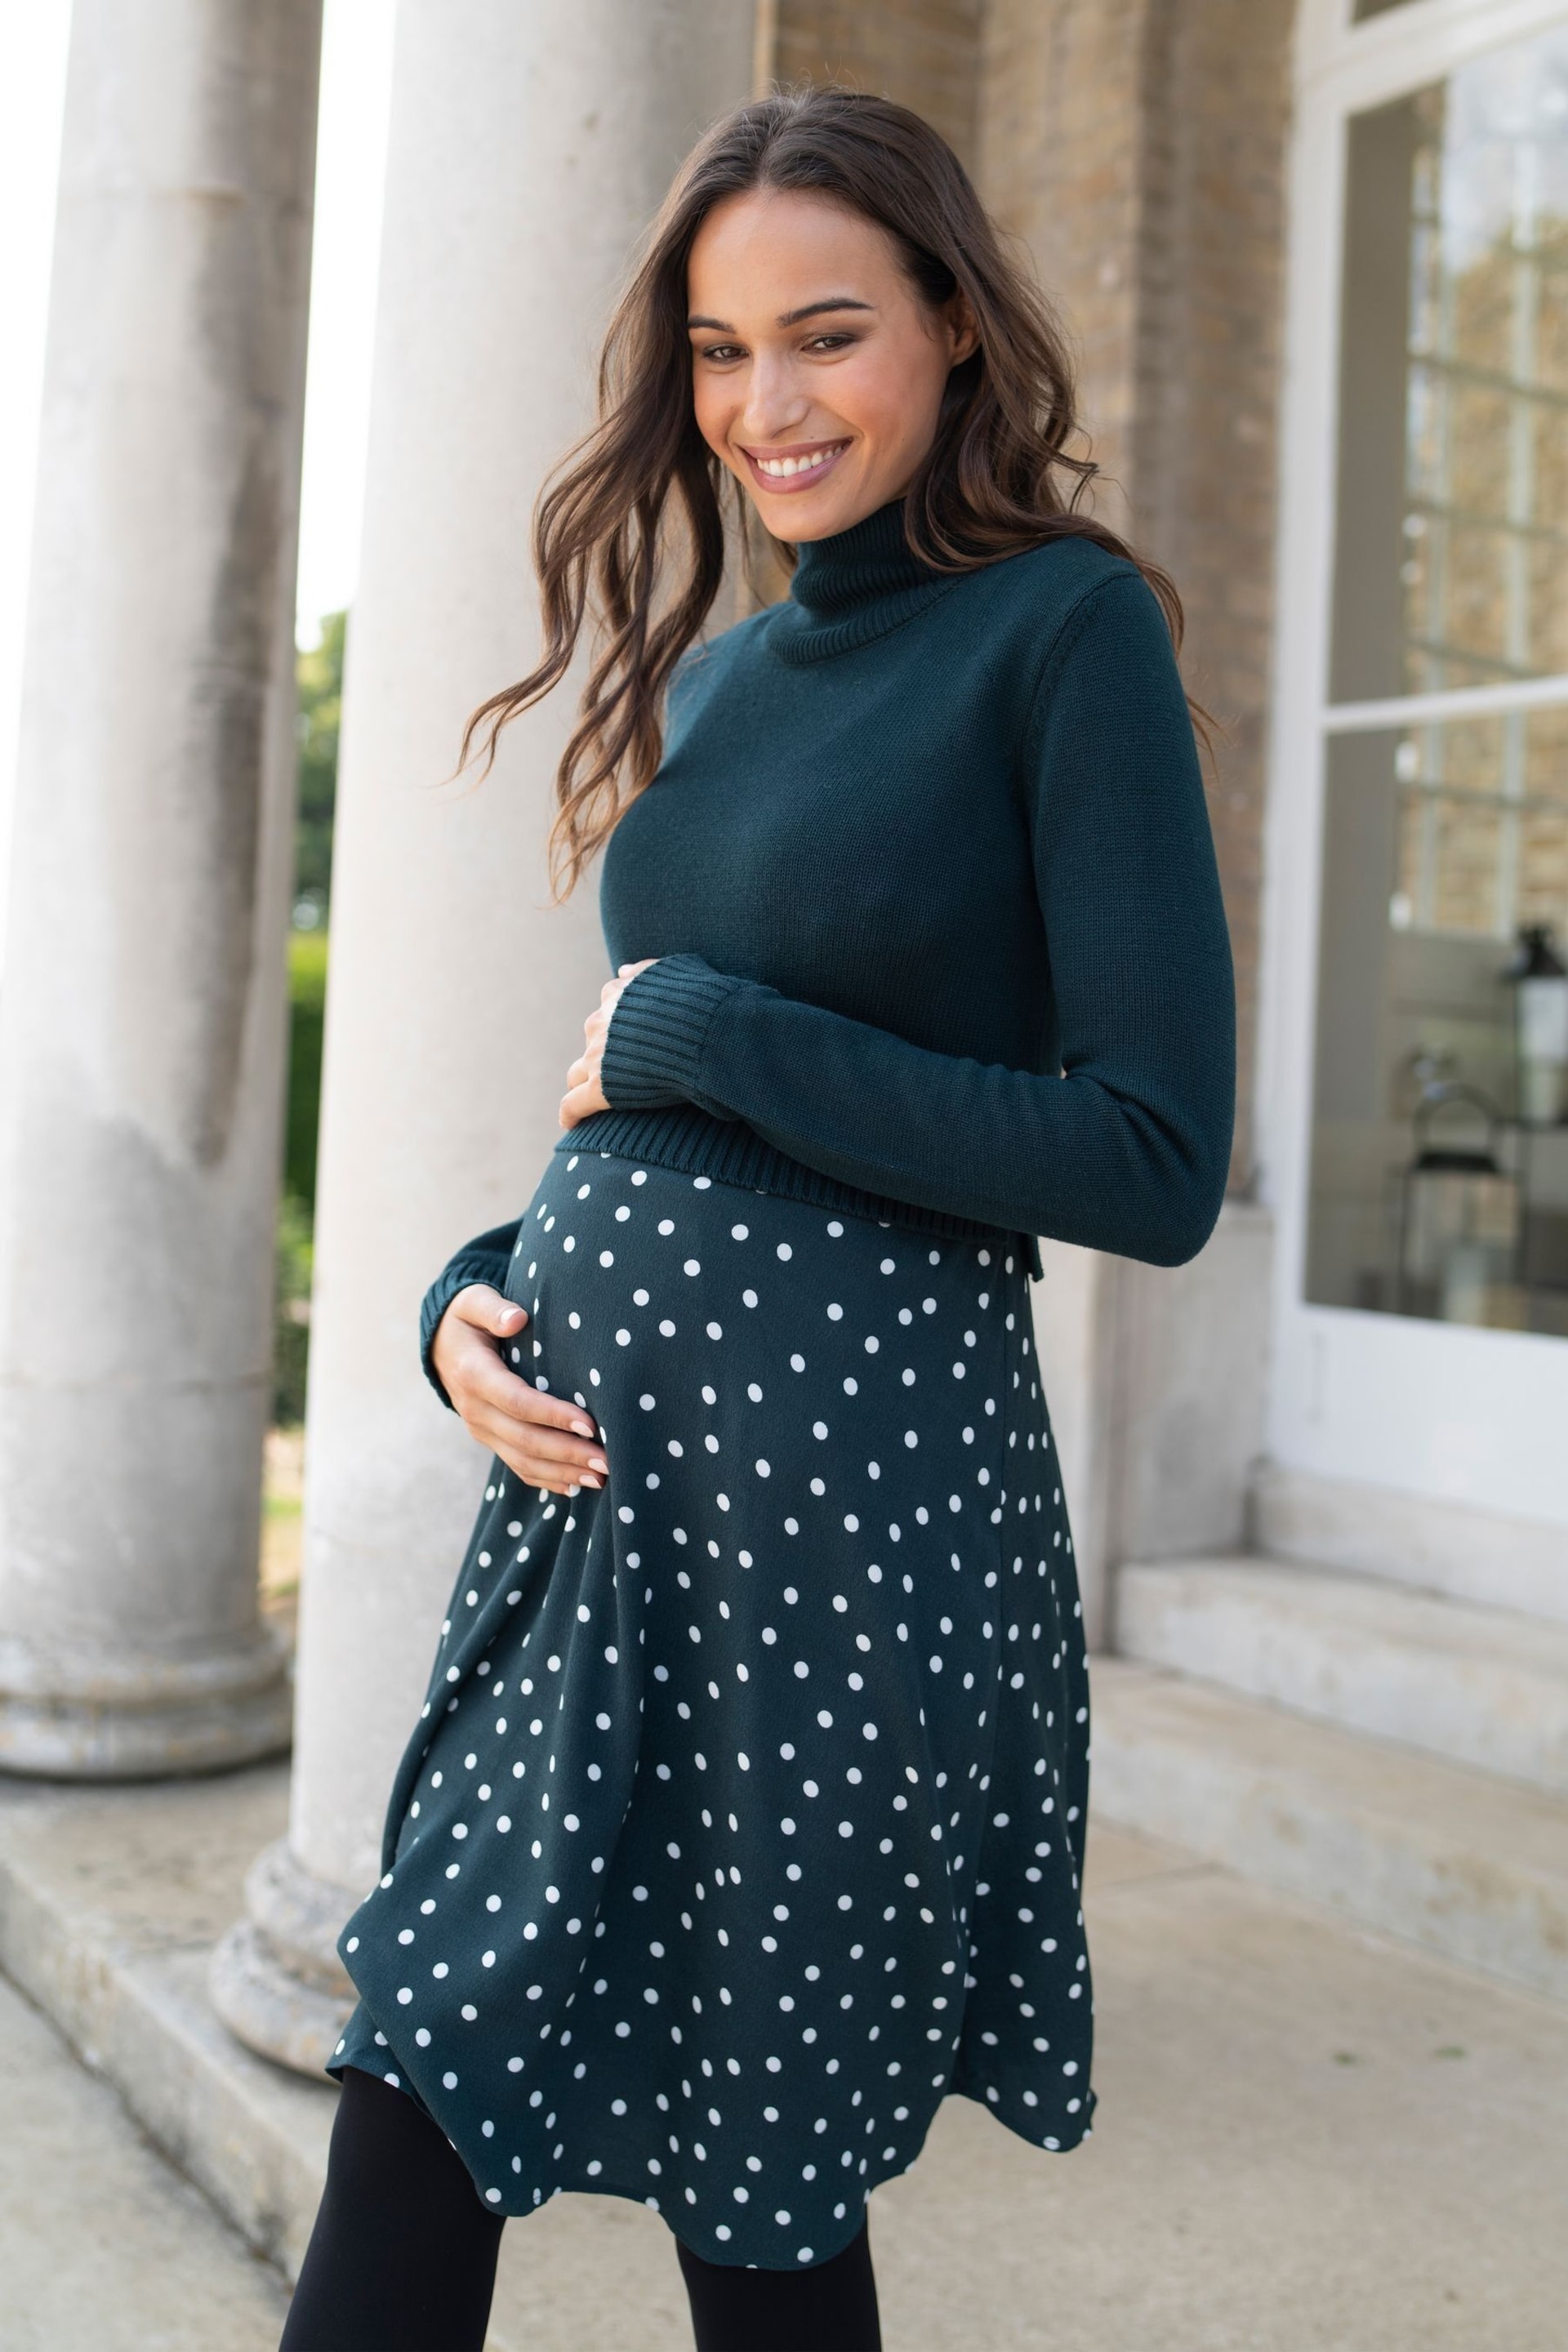 Seraphine Green Knit Topper Maternity Dress with Spot Skirt - Image 1 of 5